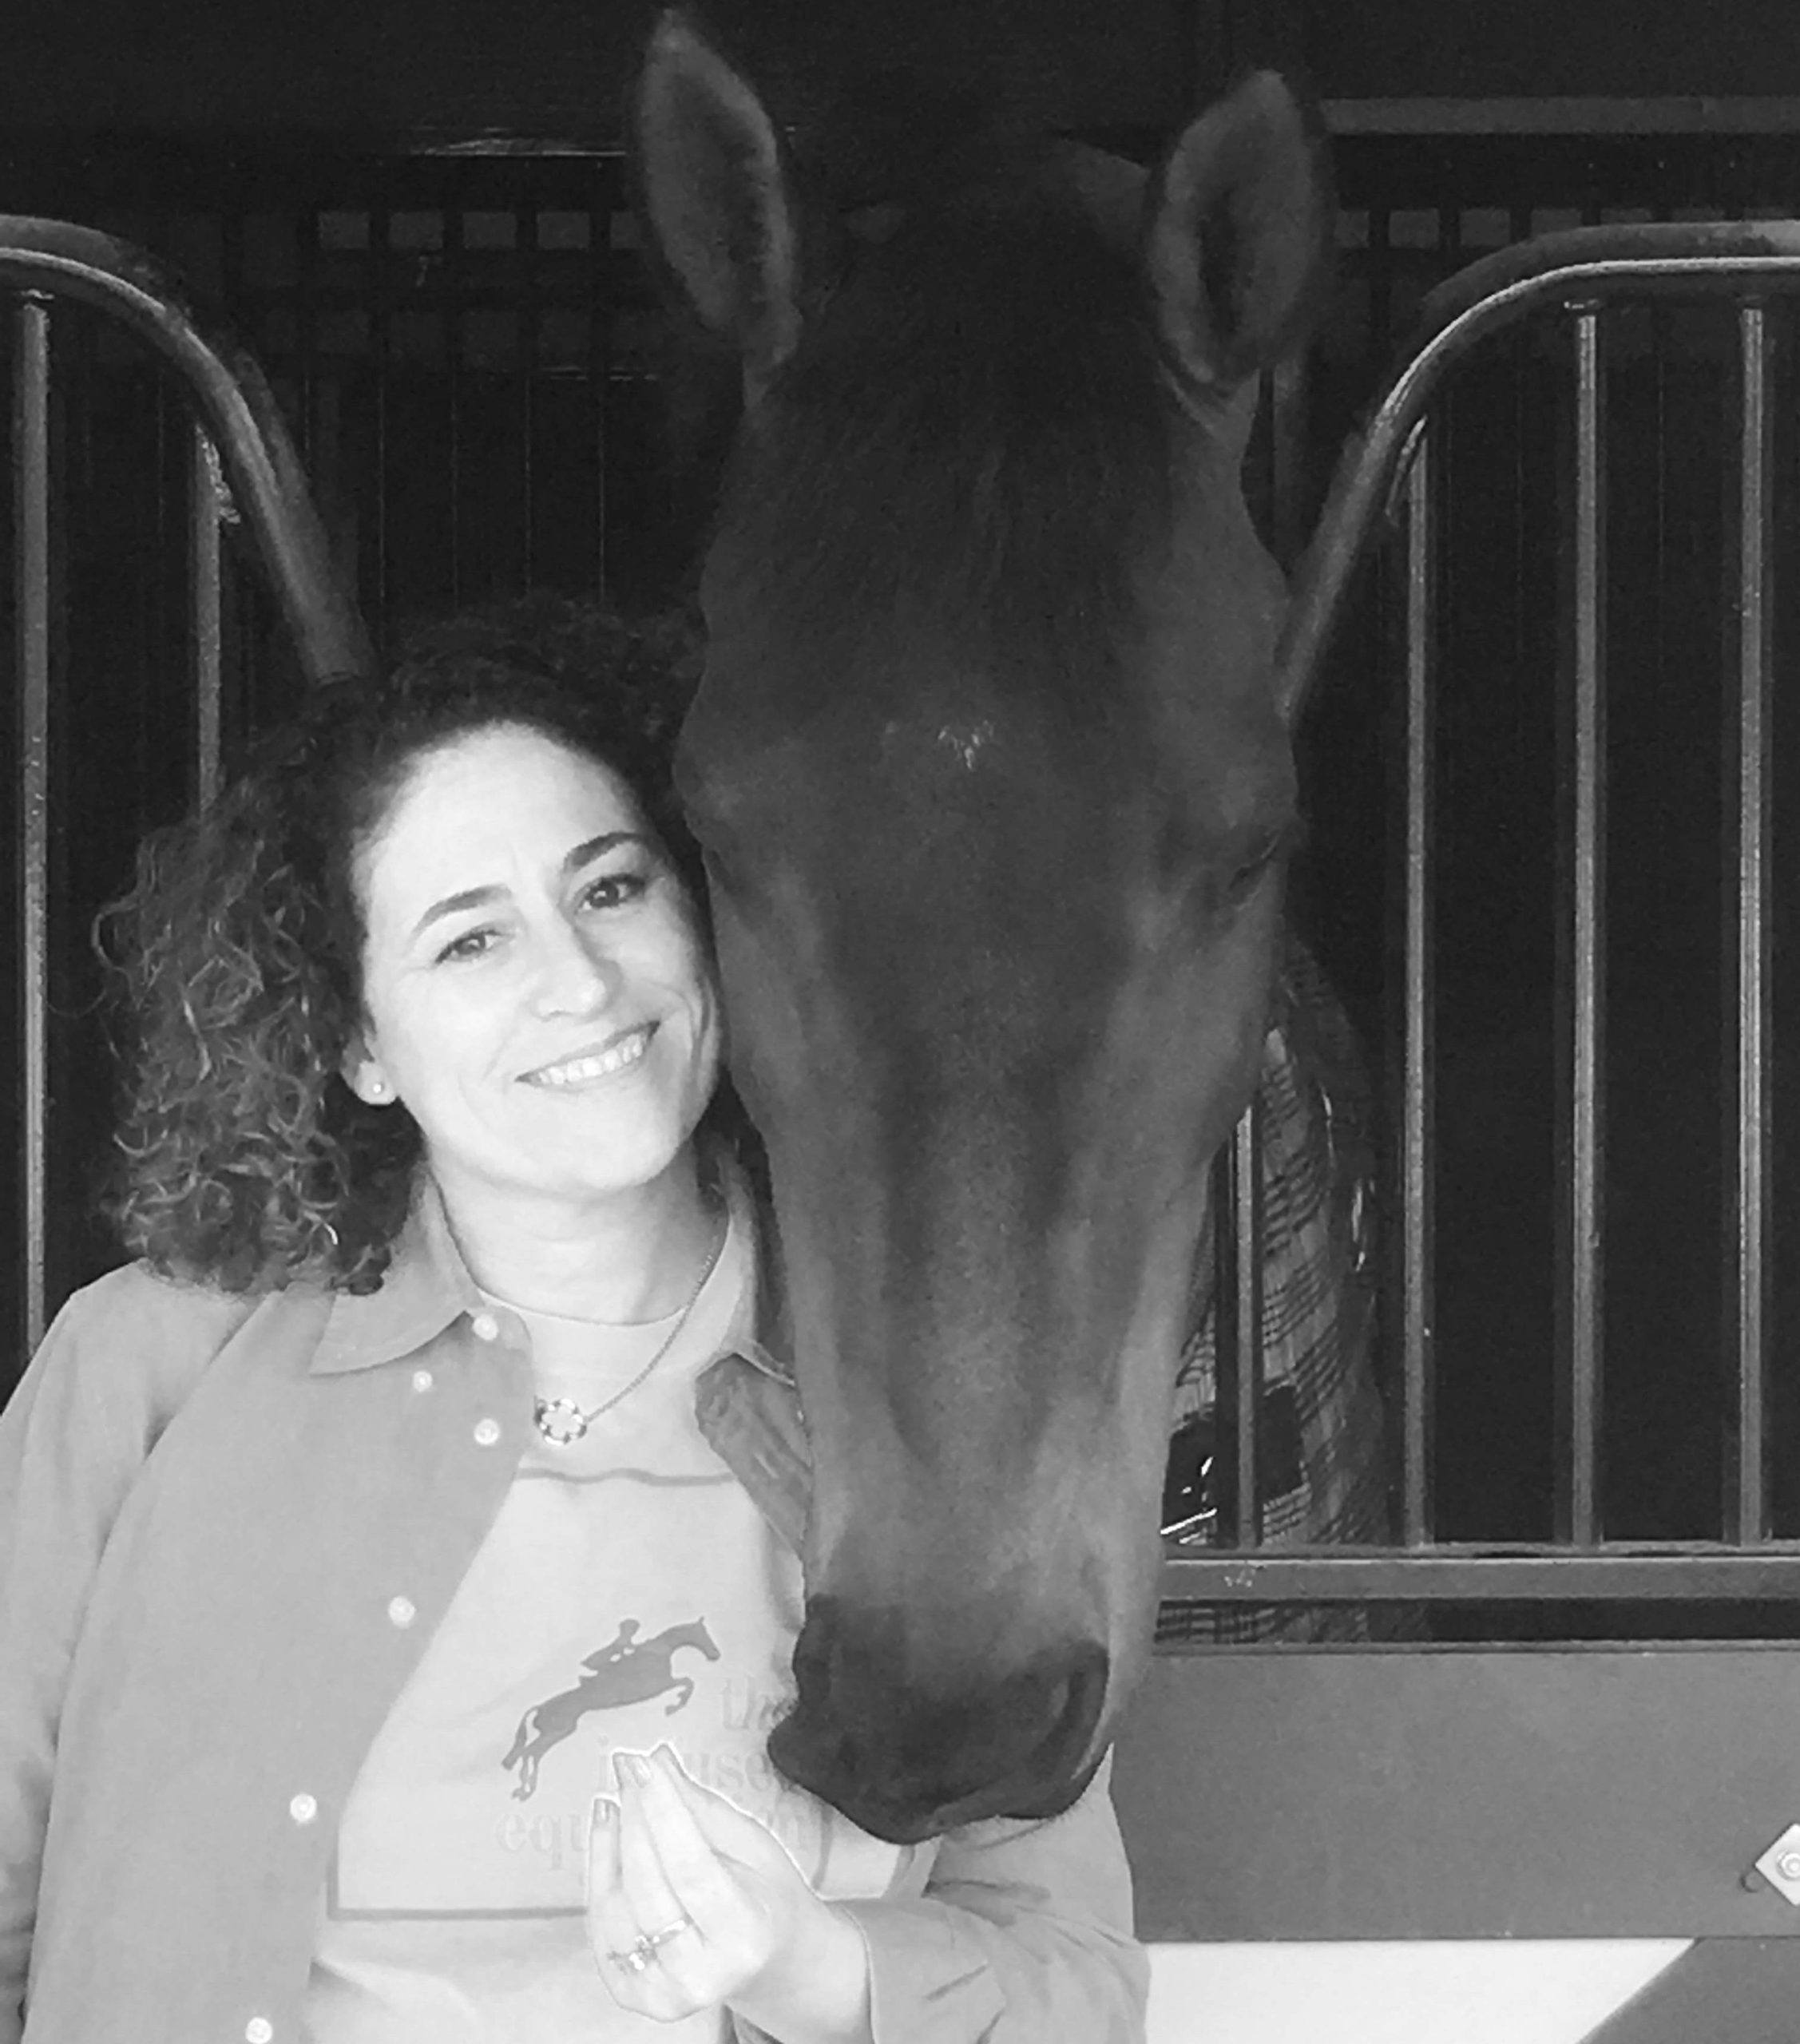 Company Spotlight: The Infused Equestrian